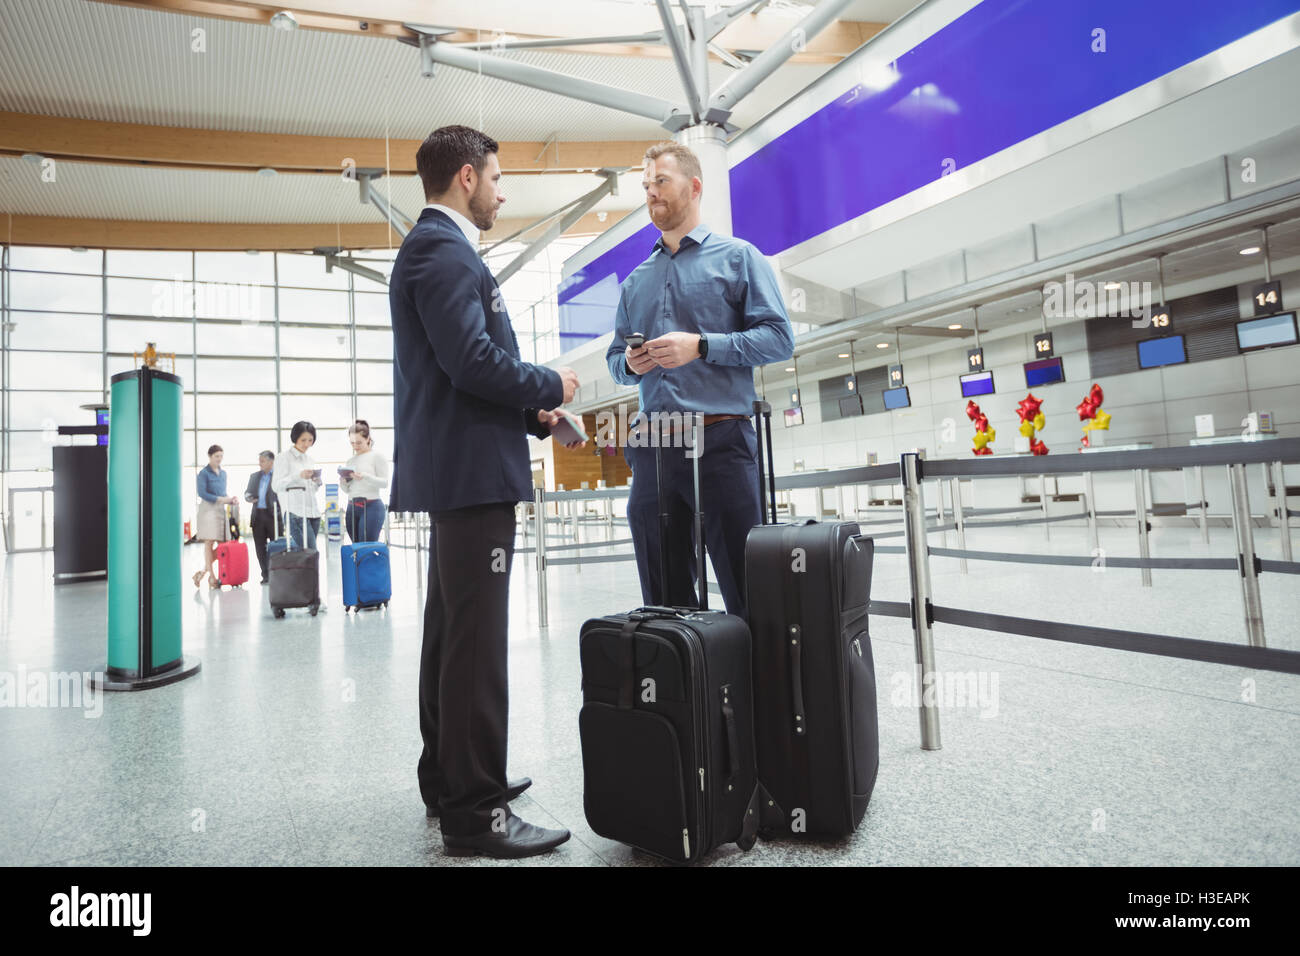 Business people waiting at check-in counter with luggage Stock Photo